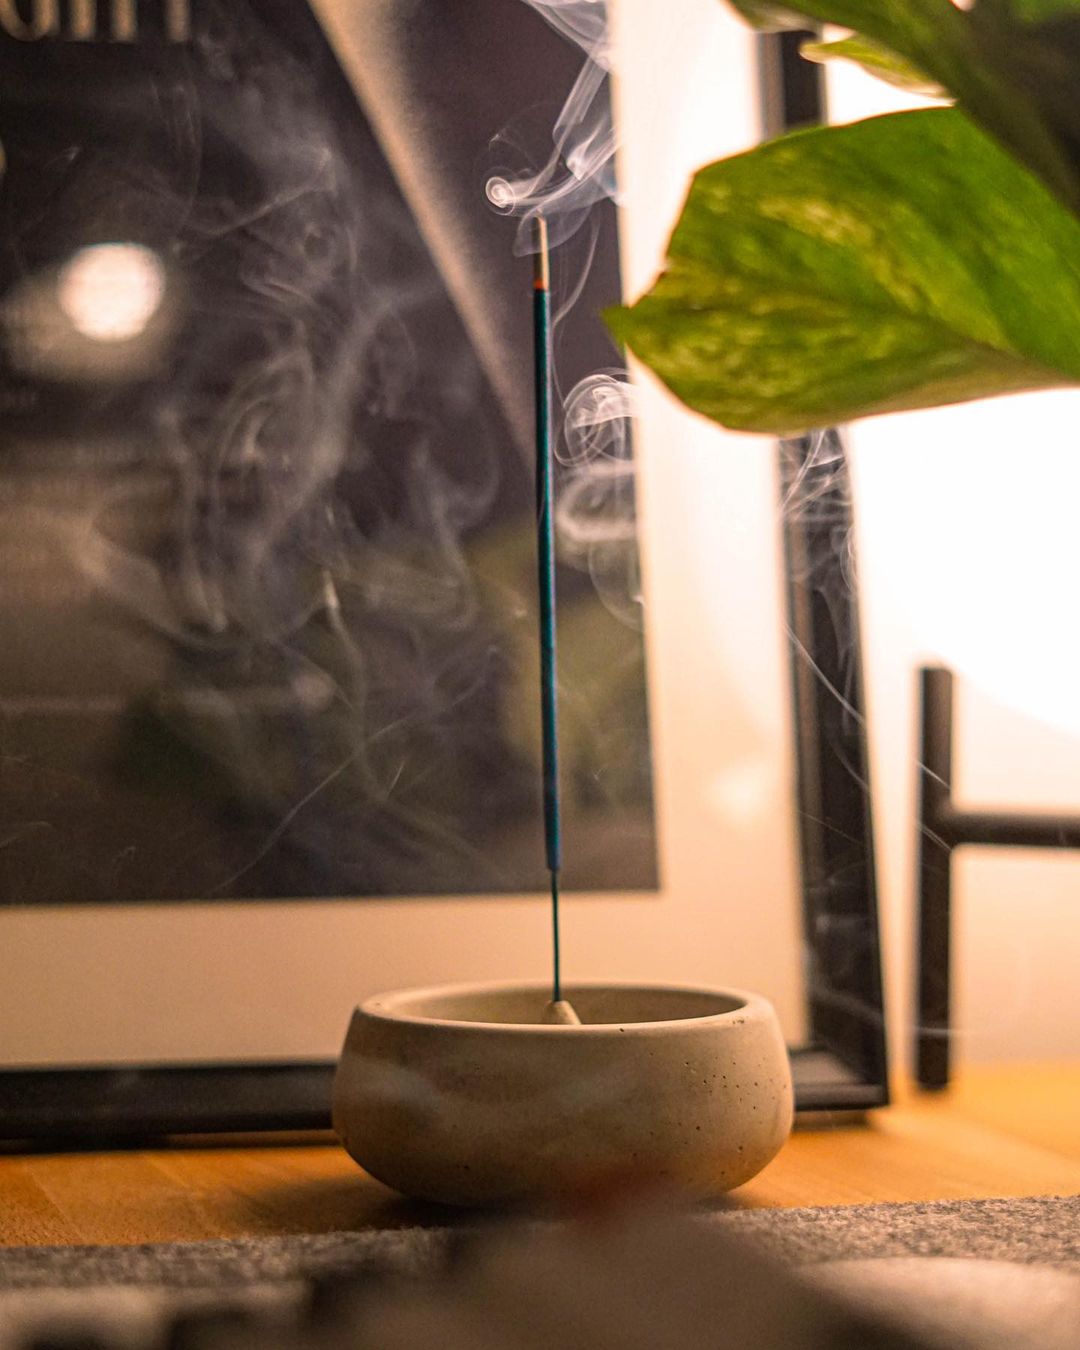 Incense burning in a clay holder on a desk. Photo by Instagram user @robert.mccombe